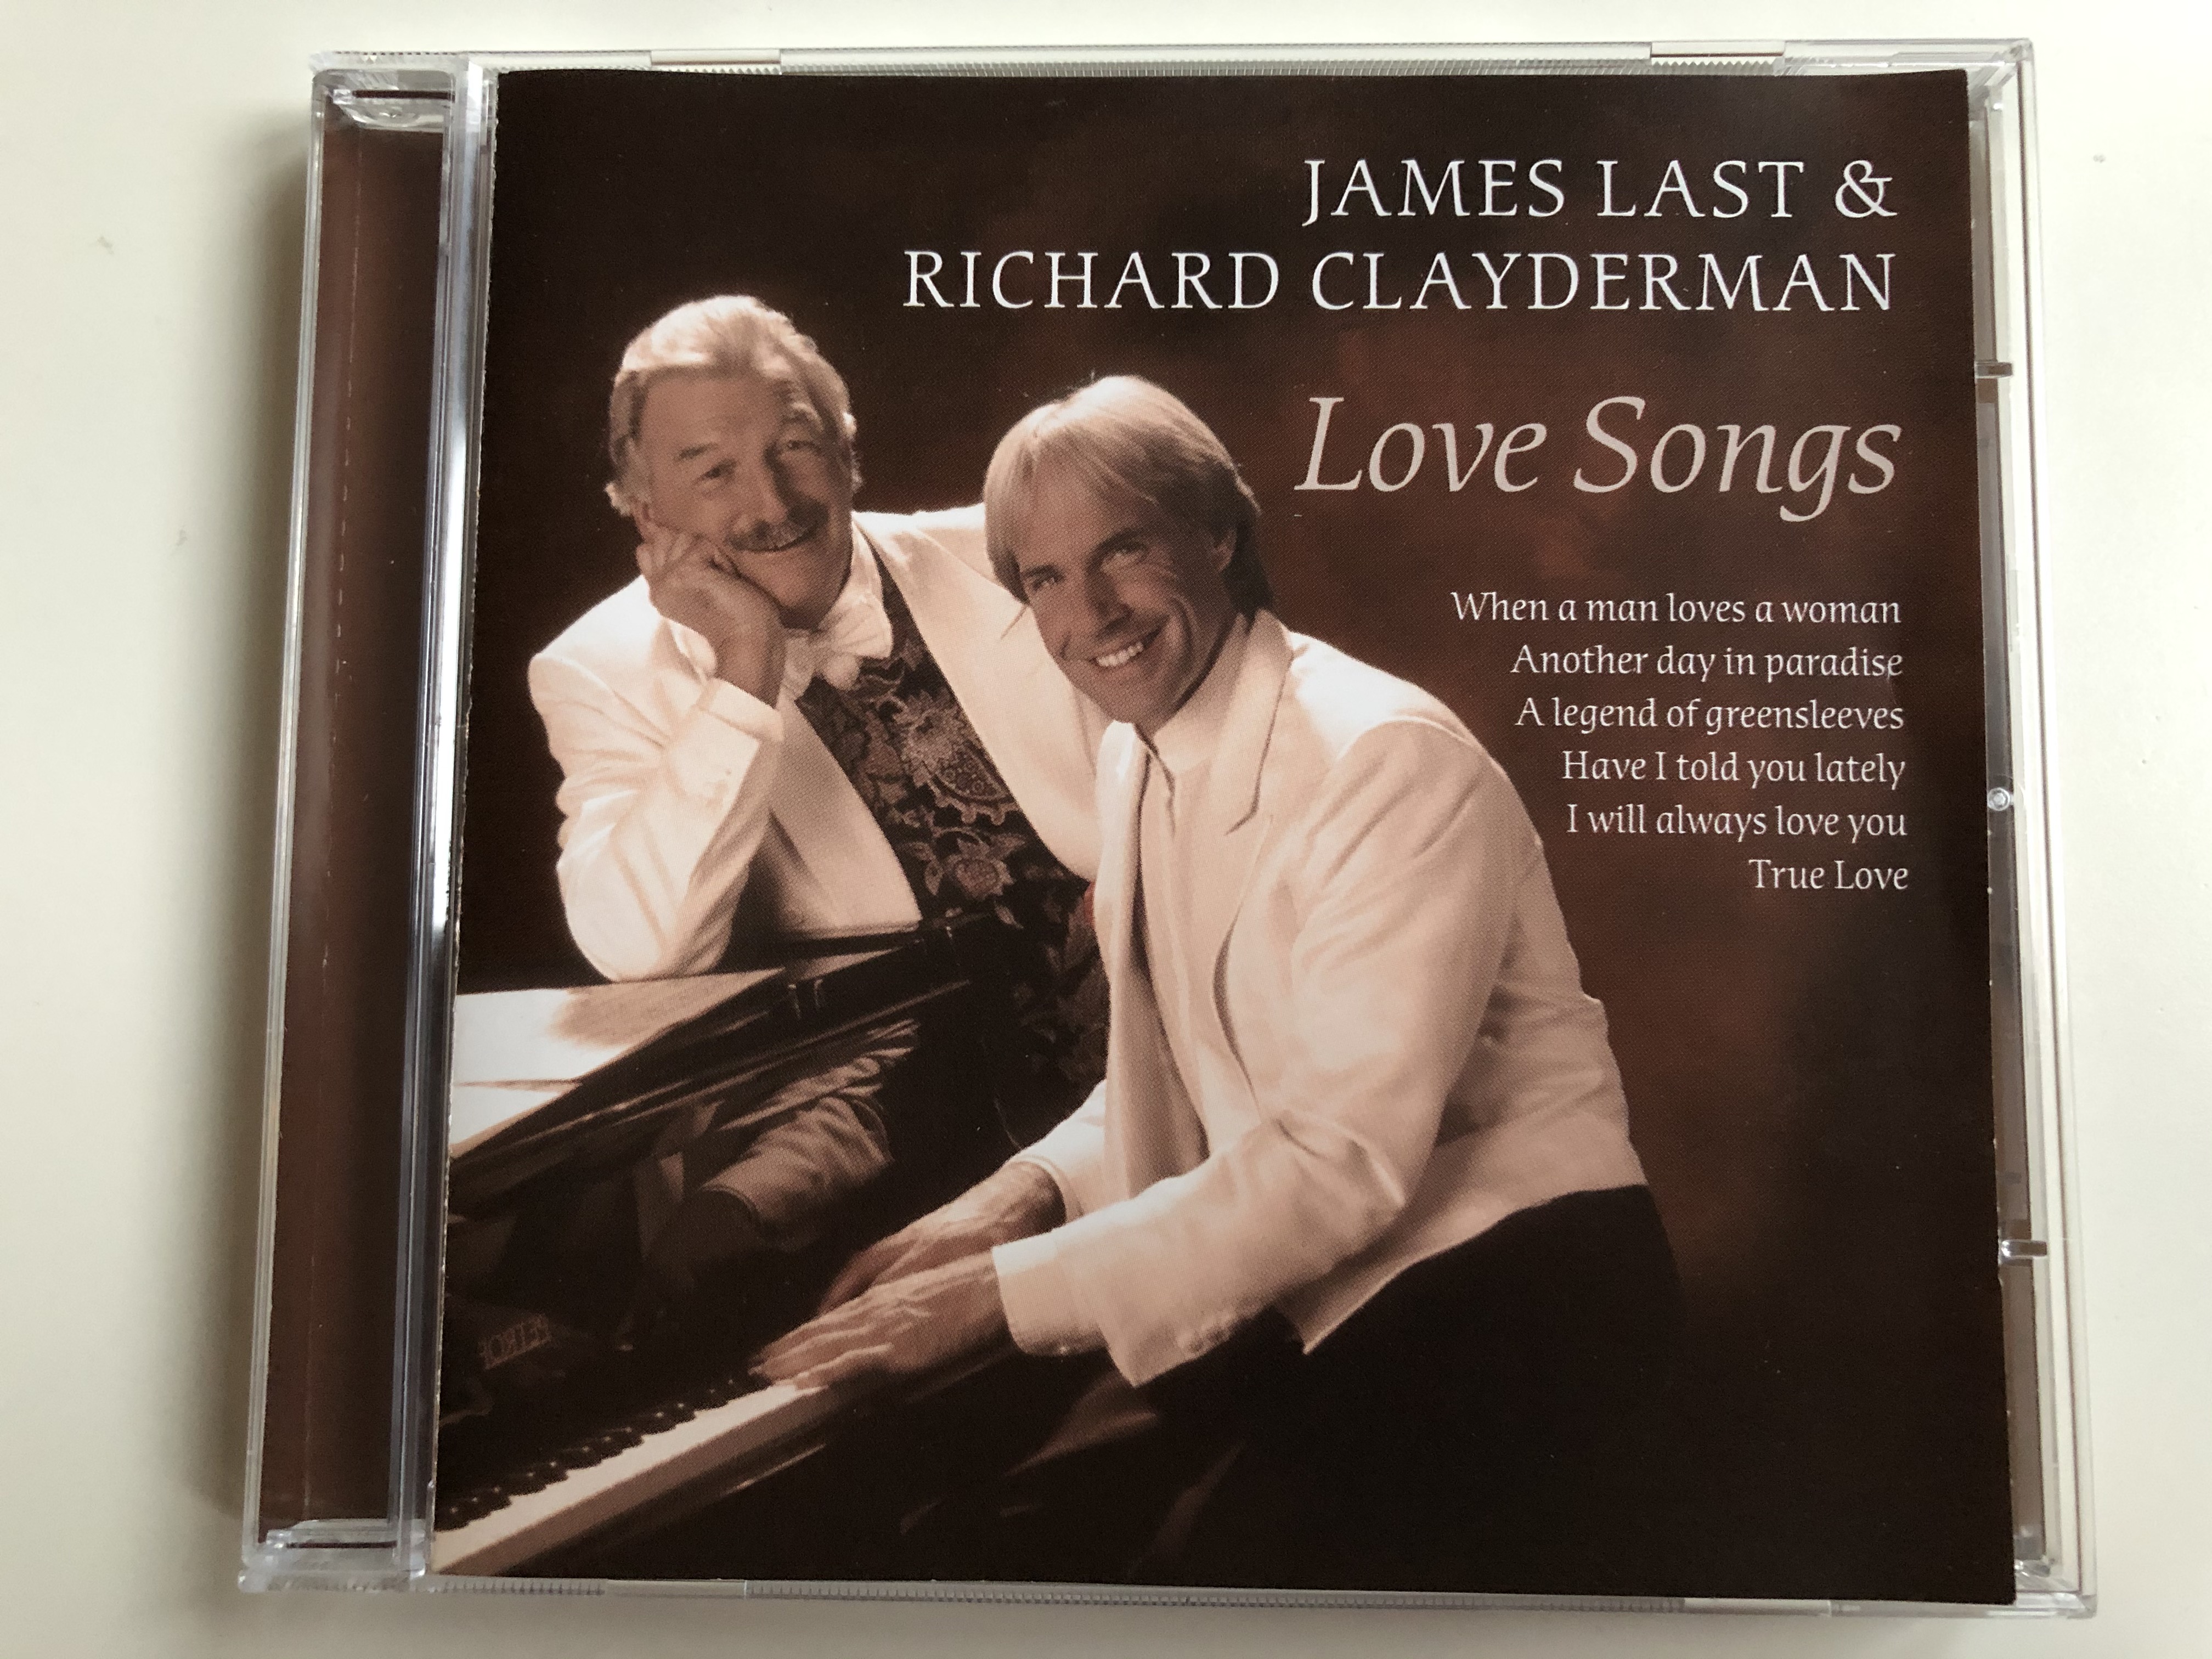 james-last-richard-clayderman-love-songs-when-a-man-loves-a-woman-another-day-in-paradise-a-legend-of-greensleeves-have-i-told-you-lately-i-will-always-love-you-true-love-disky-audio-1-.jpg